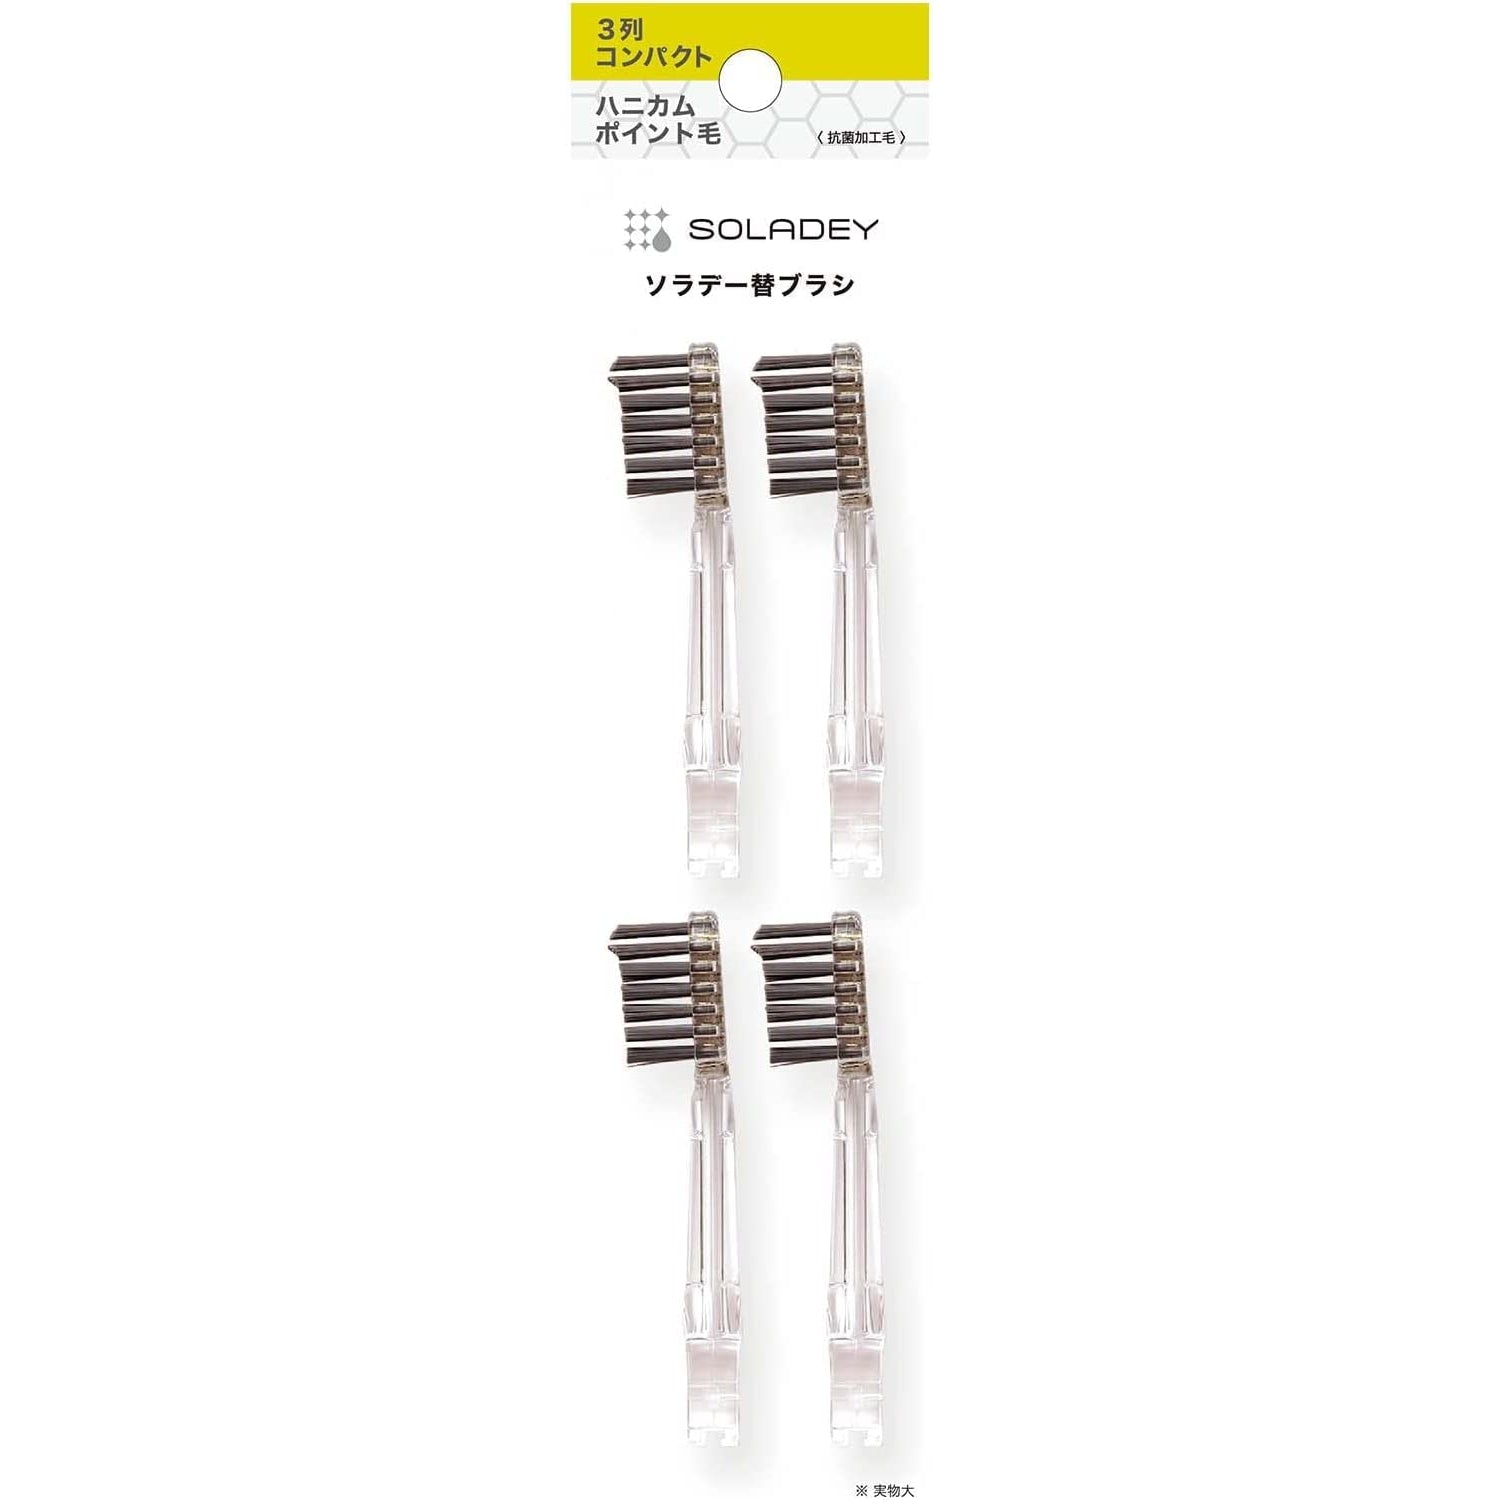 Soladey N4 Ionic Toothbrush Compact Replacement Heads Medium Black 4 ct., Japanese Taste